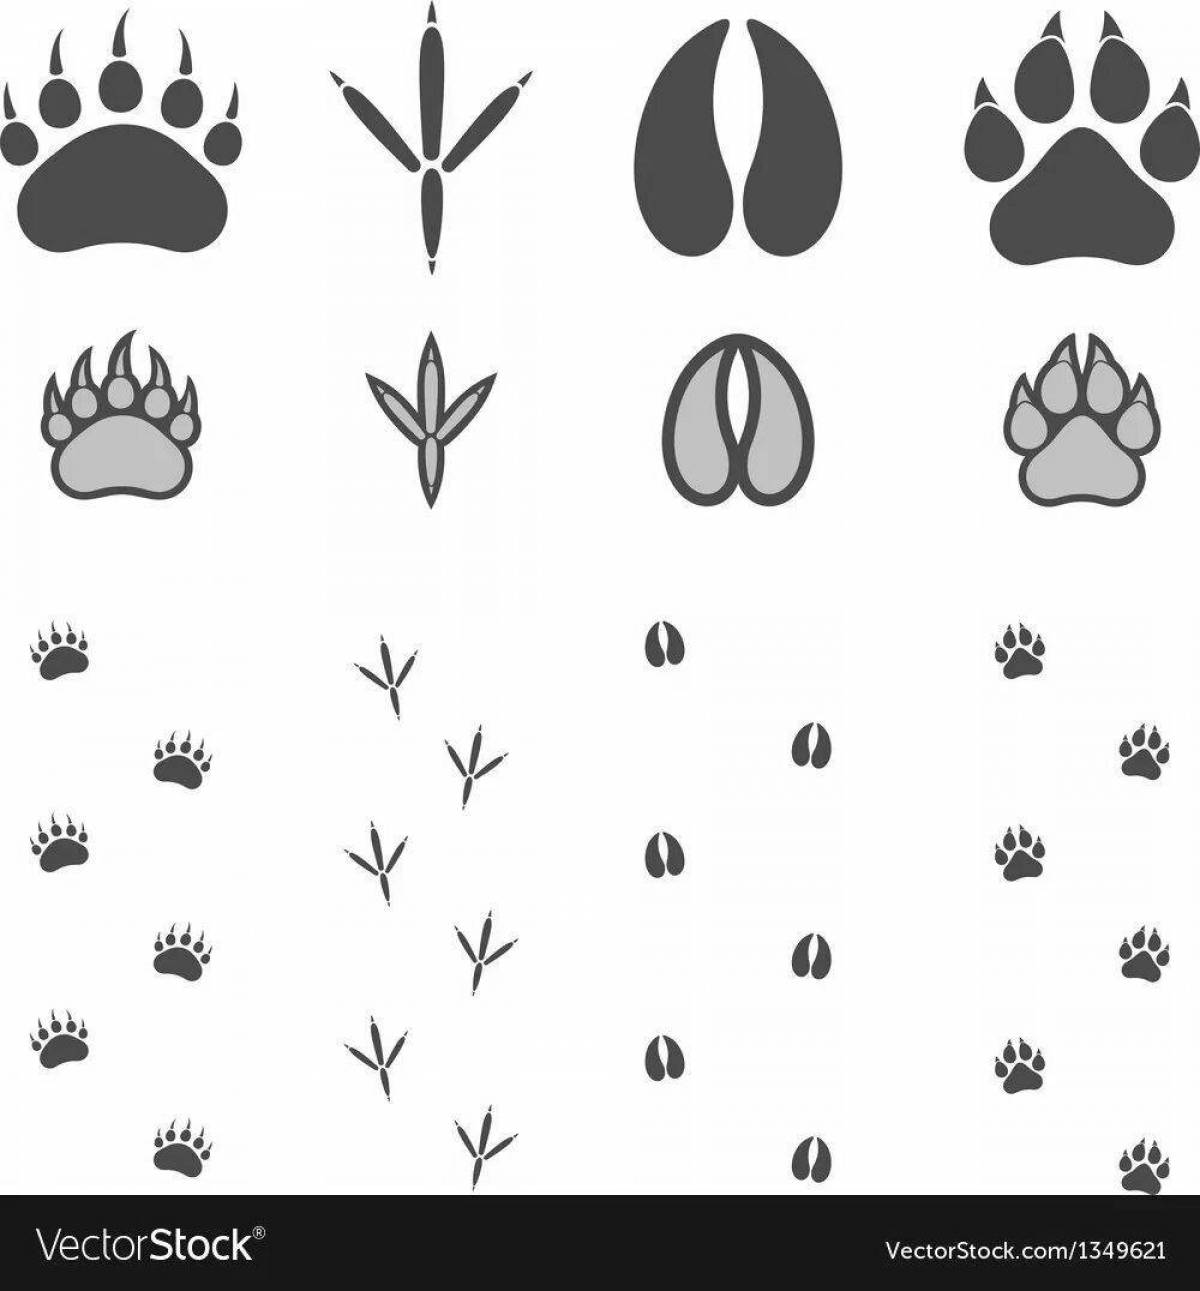 Coloring book footprints of a charming hare